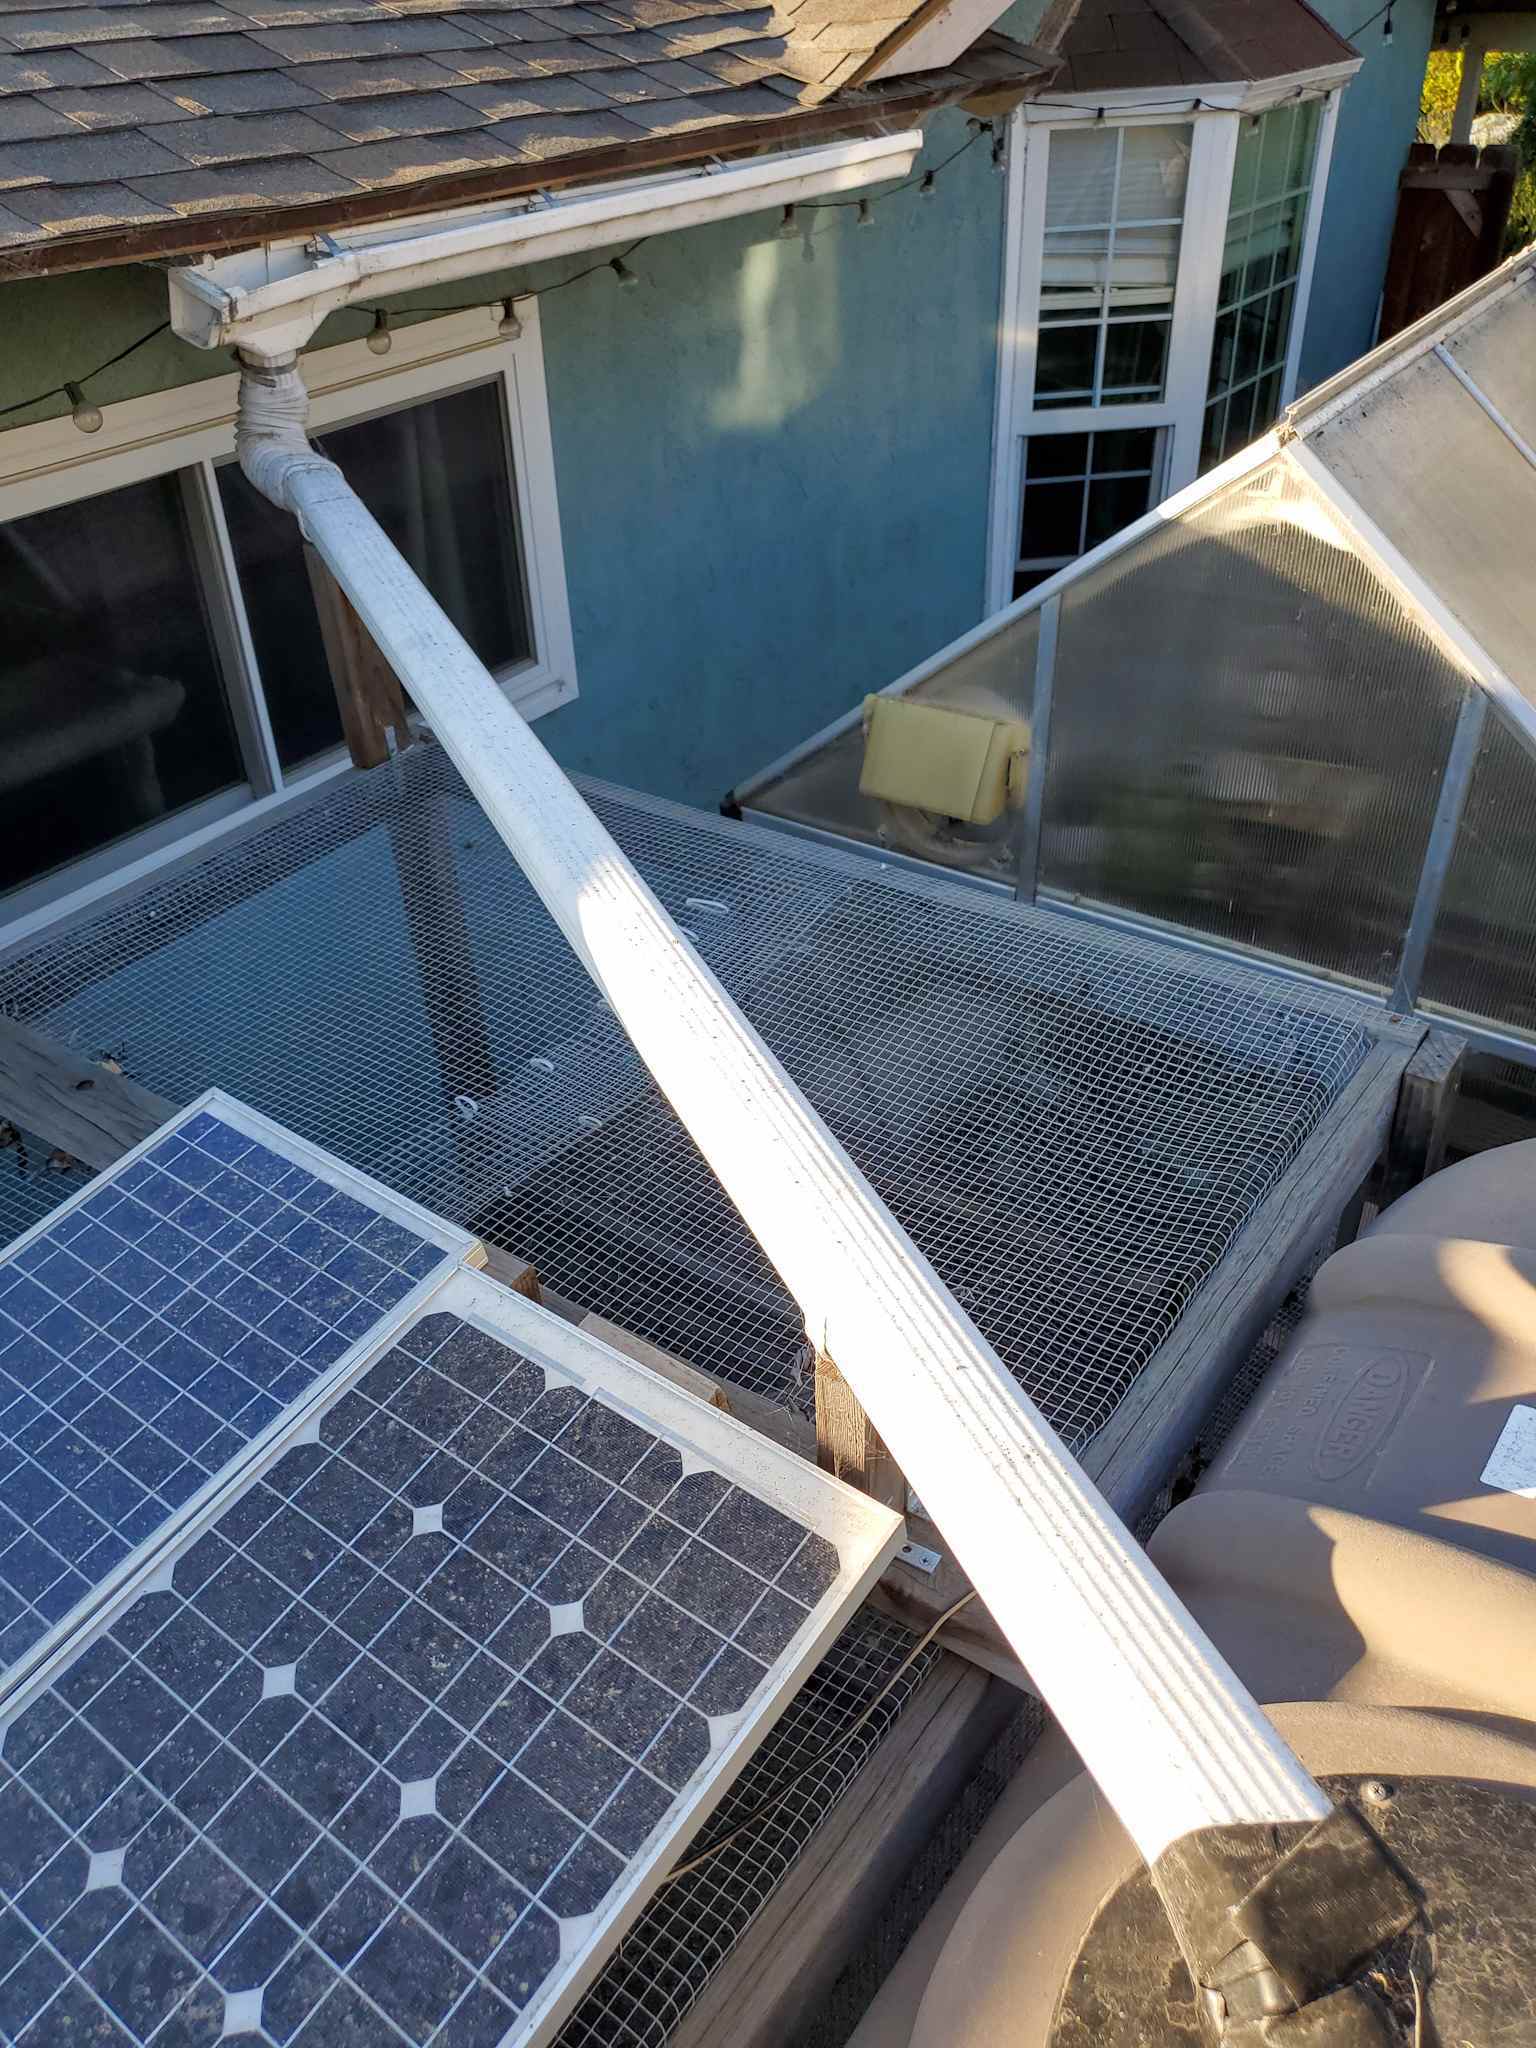 A view from the top of a rain tank, it shows a downspout connected to a gutter, traversing a chicken run and connected to the top of the rain tank. There are solar panels on top of the run next to the tank which power fans that are inside the greenhouse which is visible from the tank.